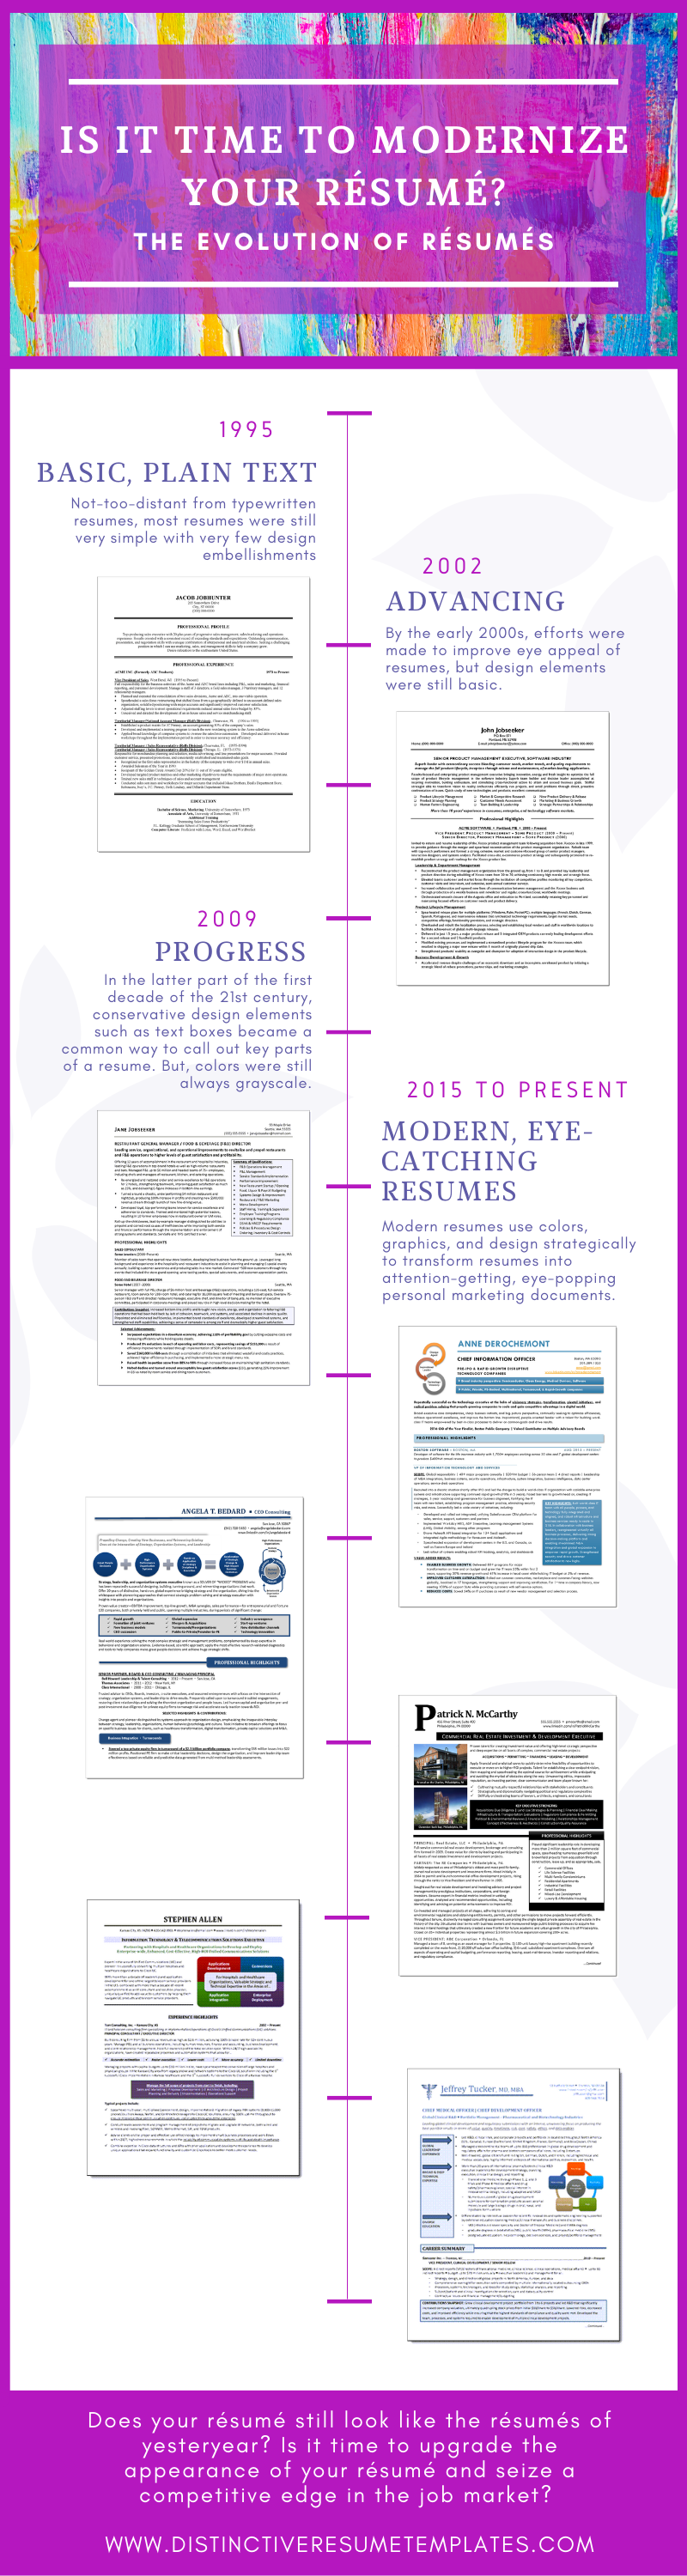 Resume Evolution Timeline Is It Time To Modernize Your Resume Infographic